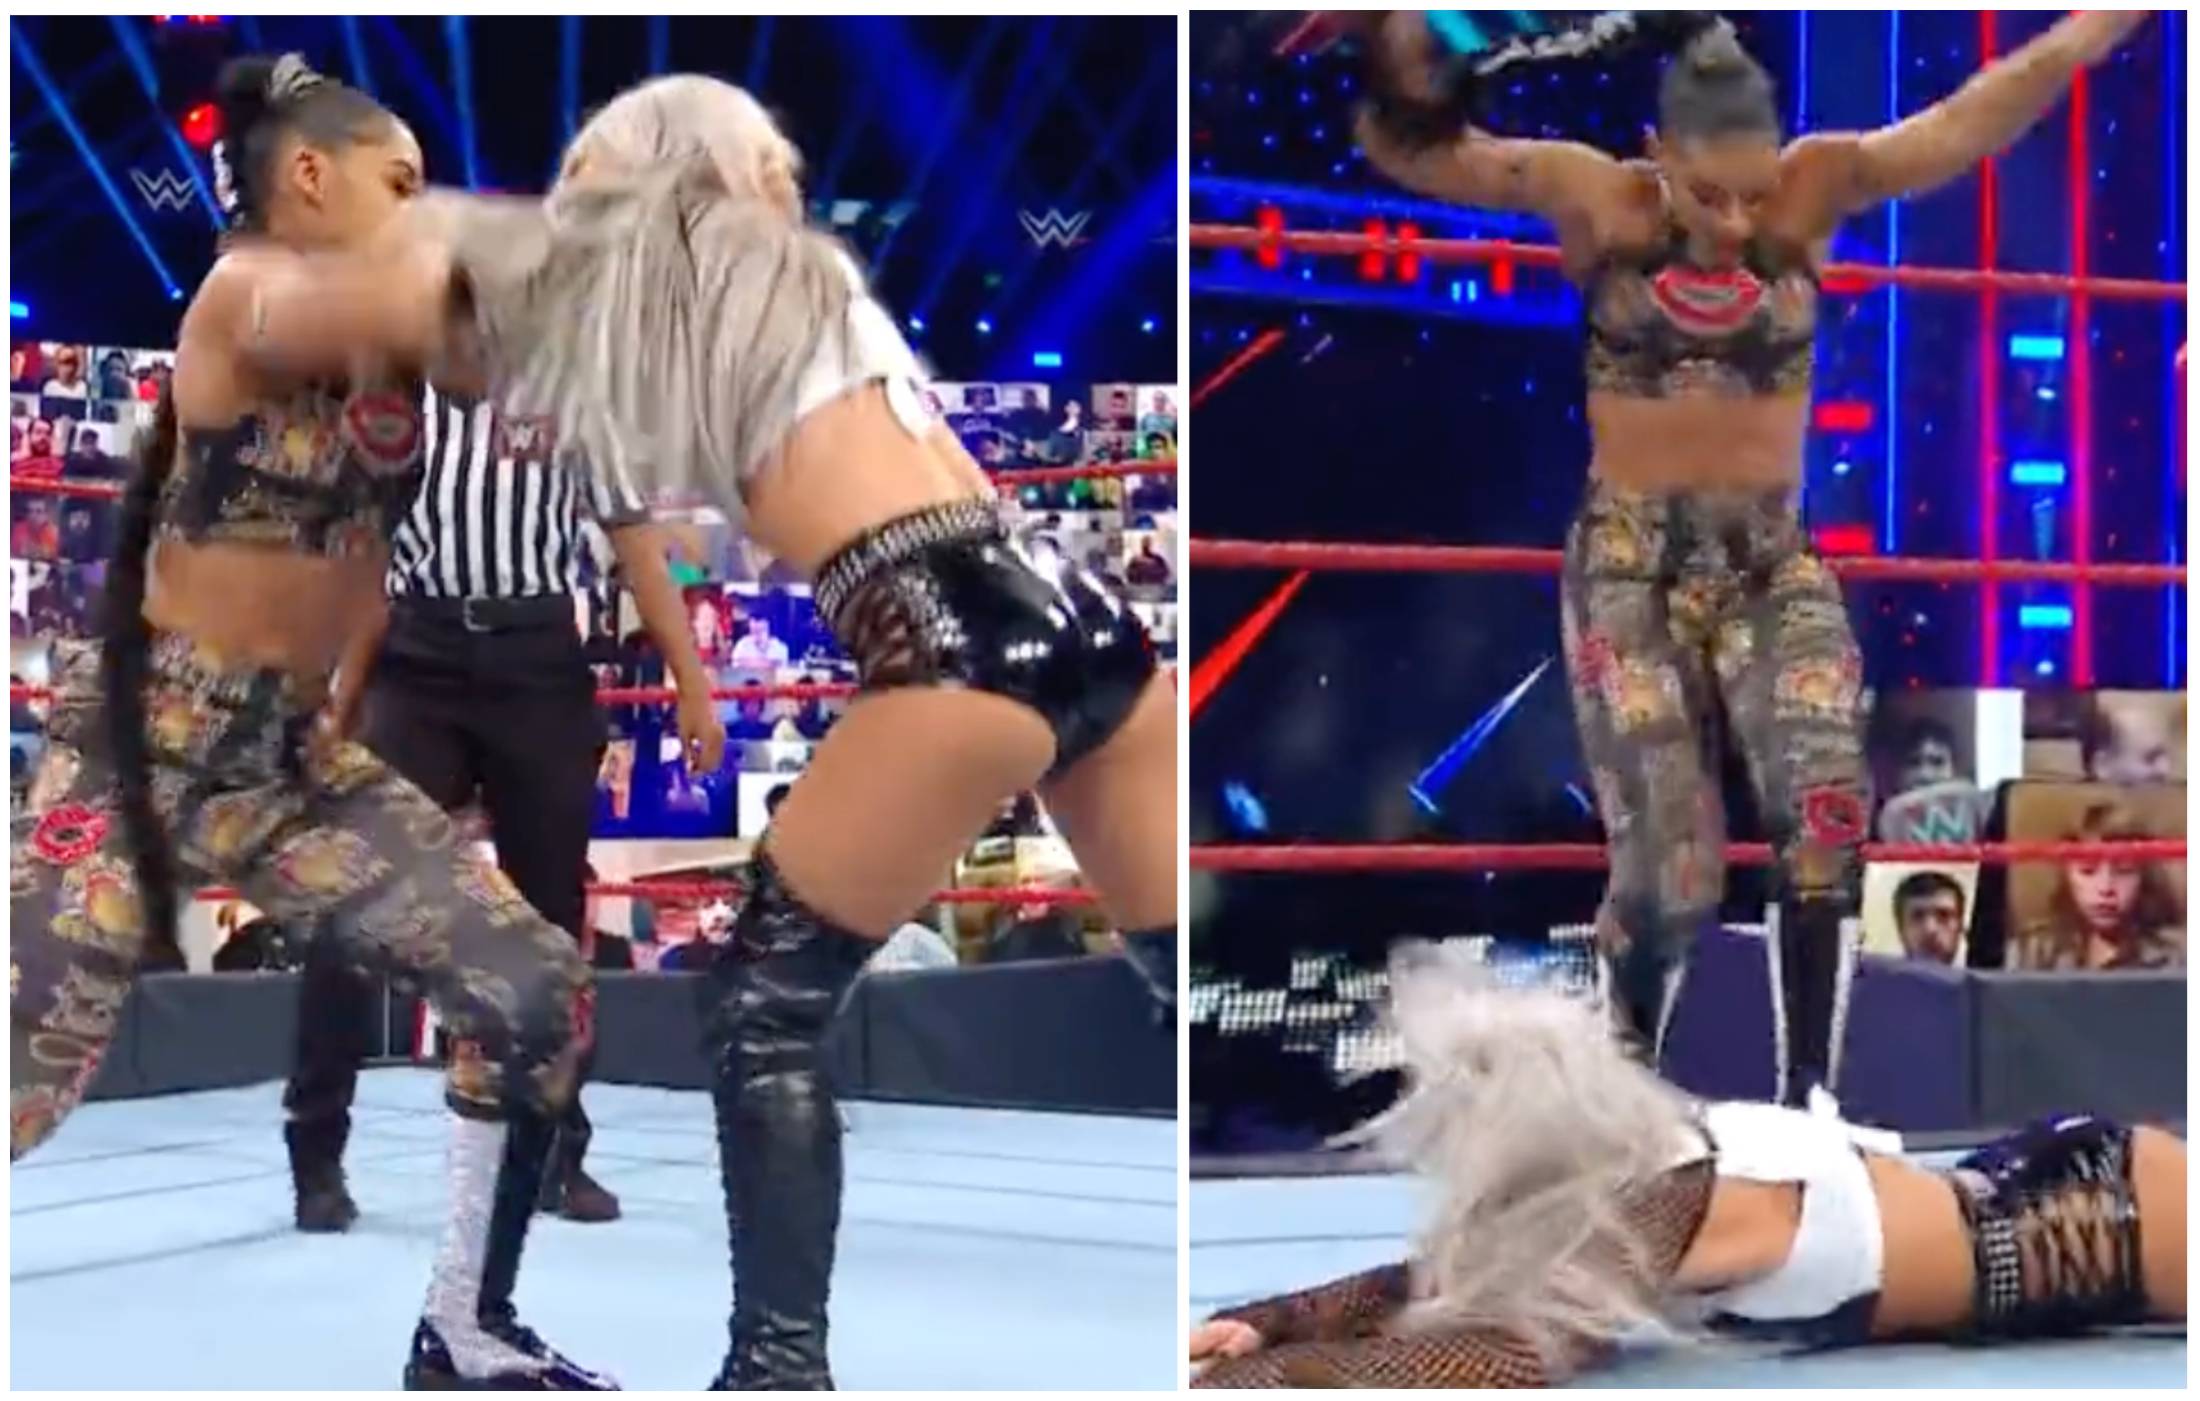 Liv Morgan and Bianca Belair are now two of WWE's top female stars